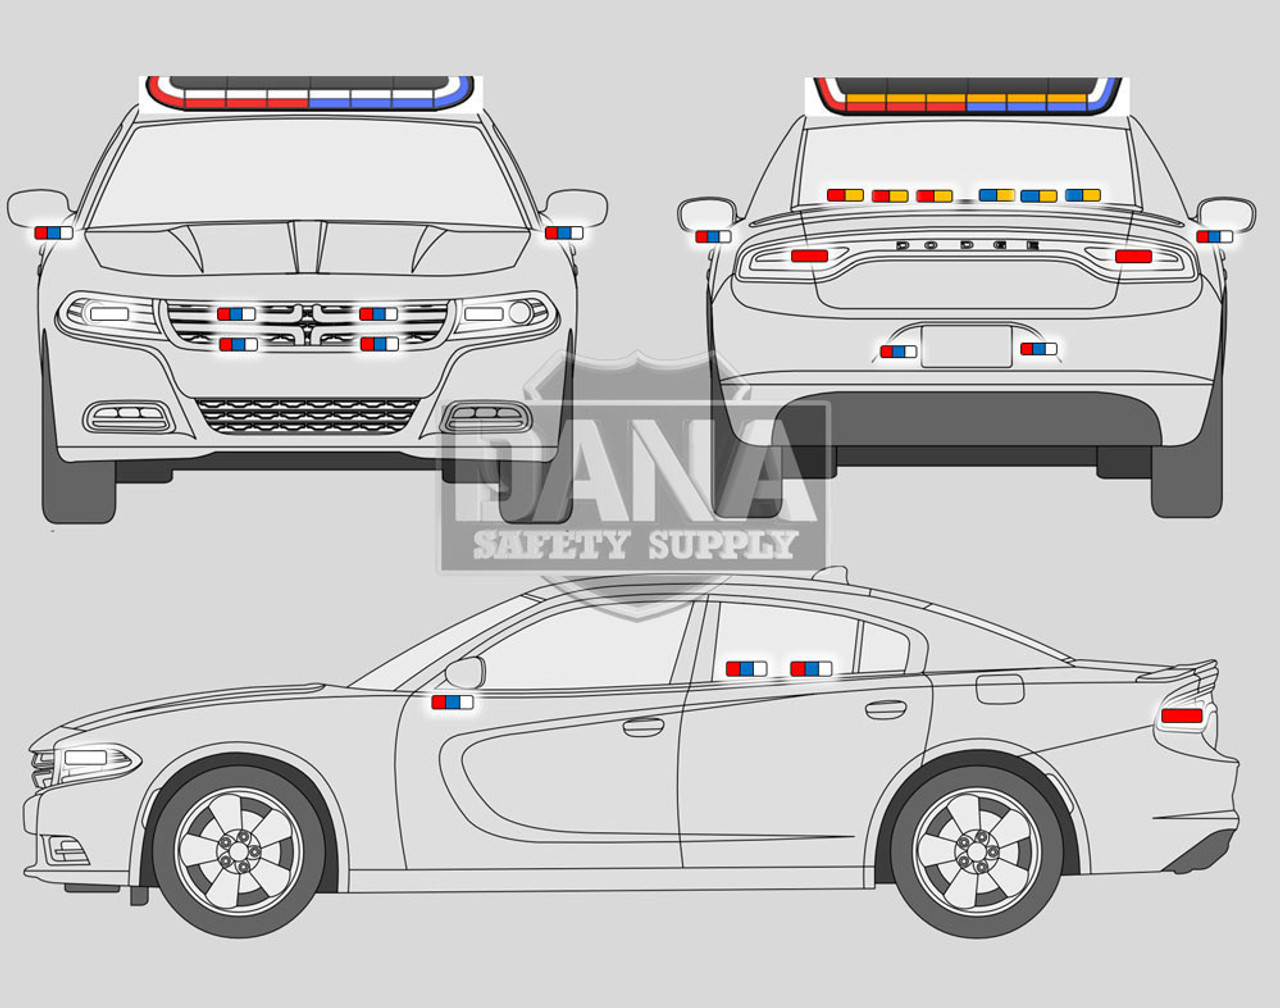 New 2023 Gray Dodge Charger PPV V8 RWD ready to be built as a Marked Patrol Package Police Pursuit Car (Emergency Lighting, Siren, Controller, Partition, Window Bars, etc.), + Delivery, G5